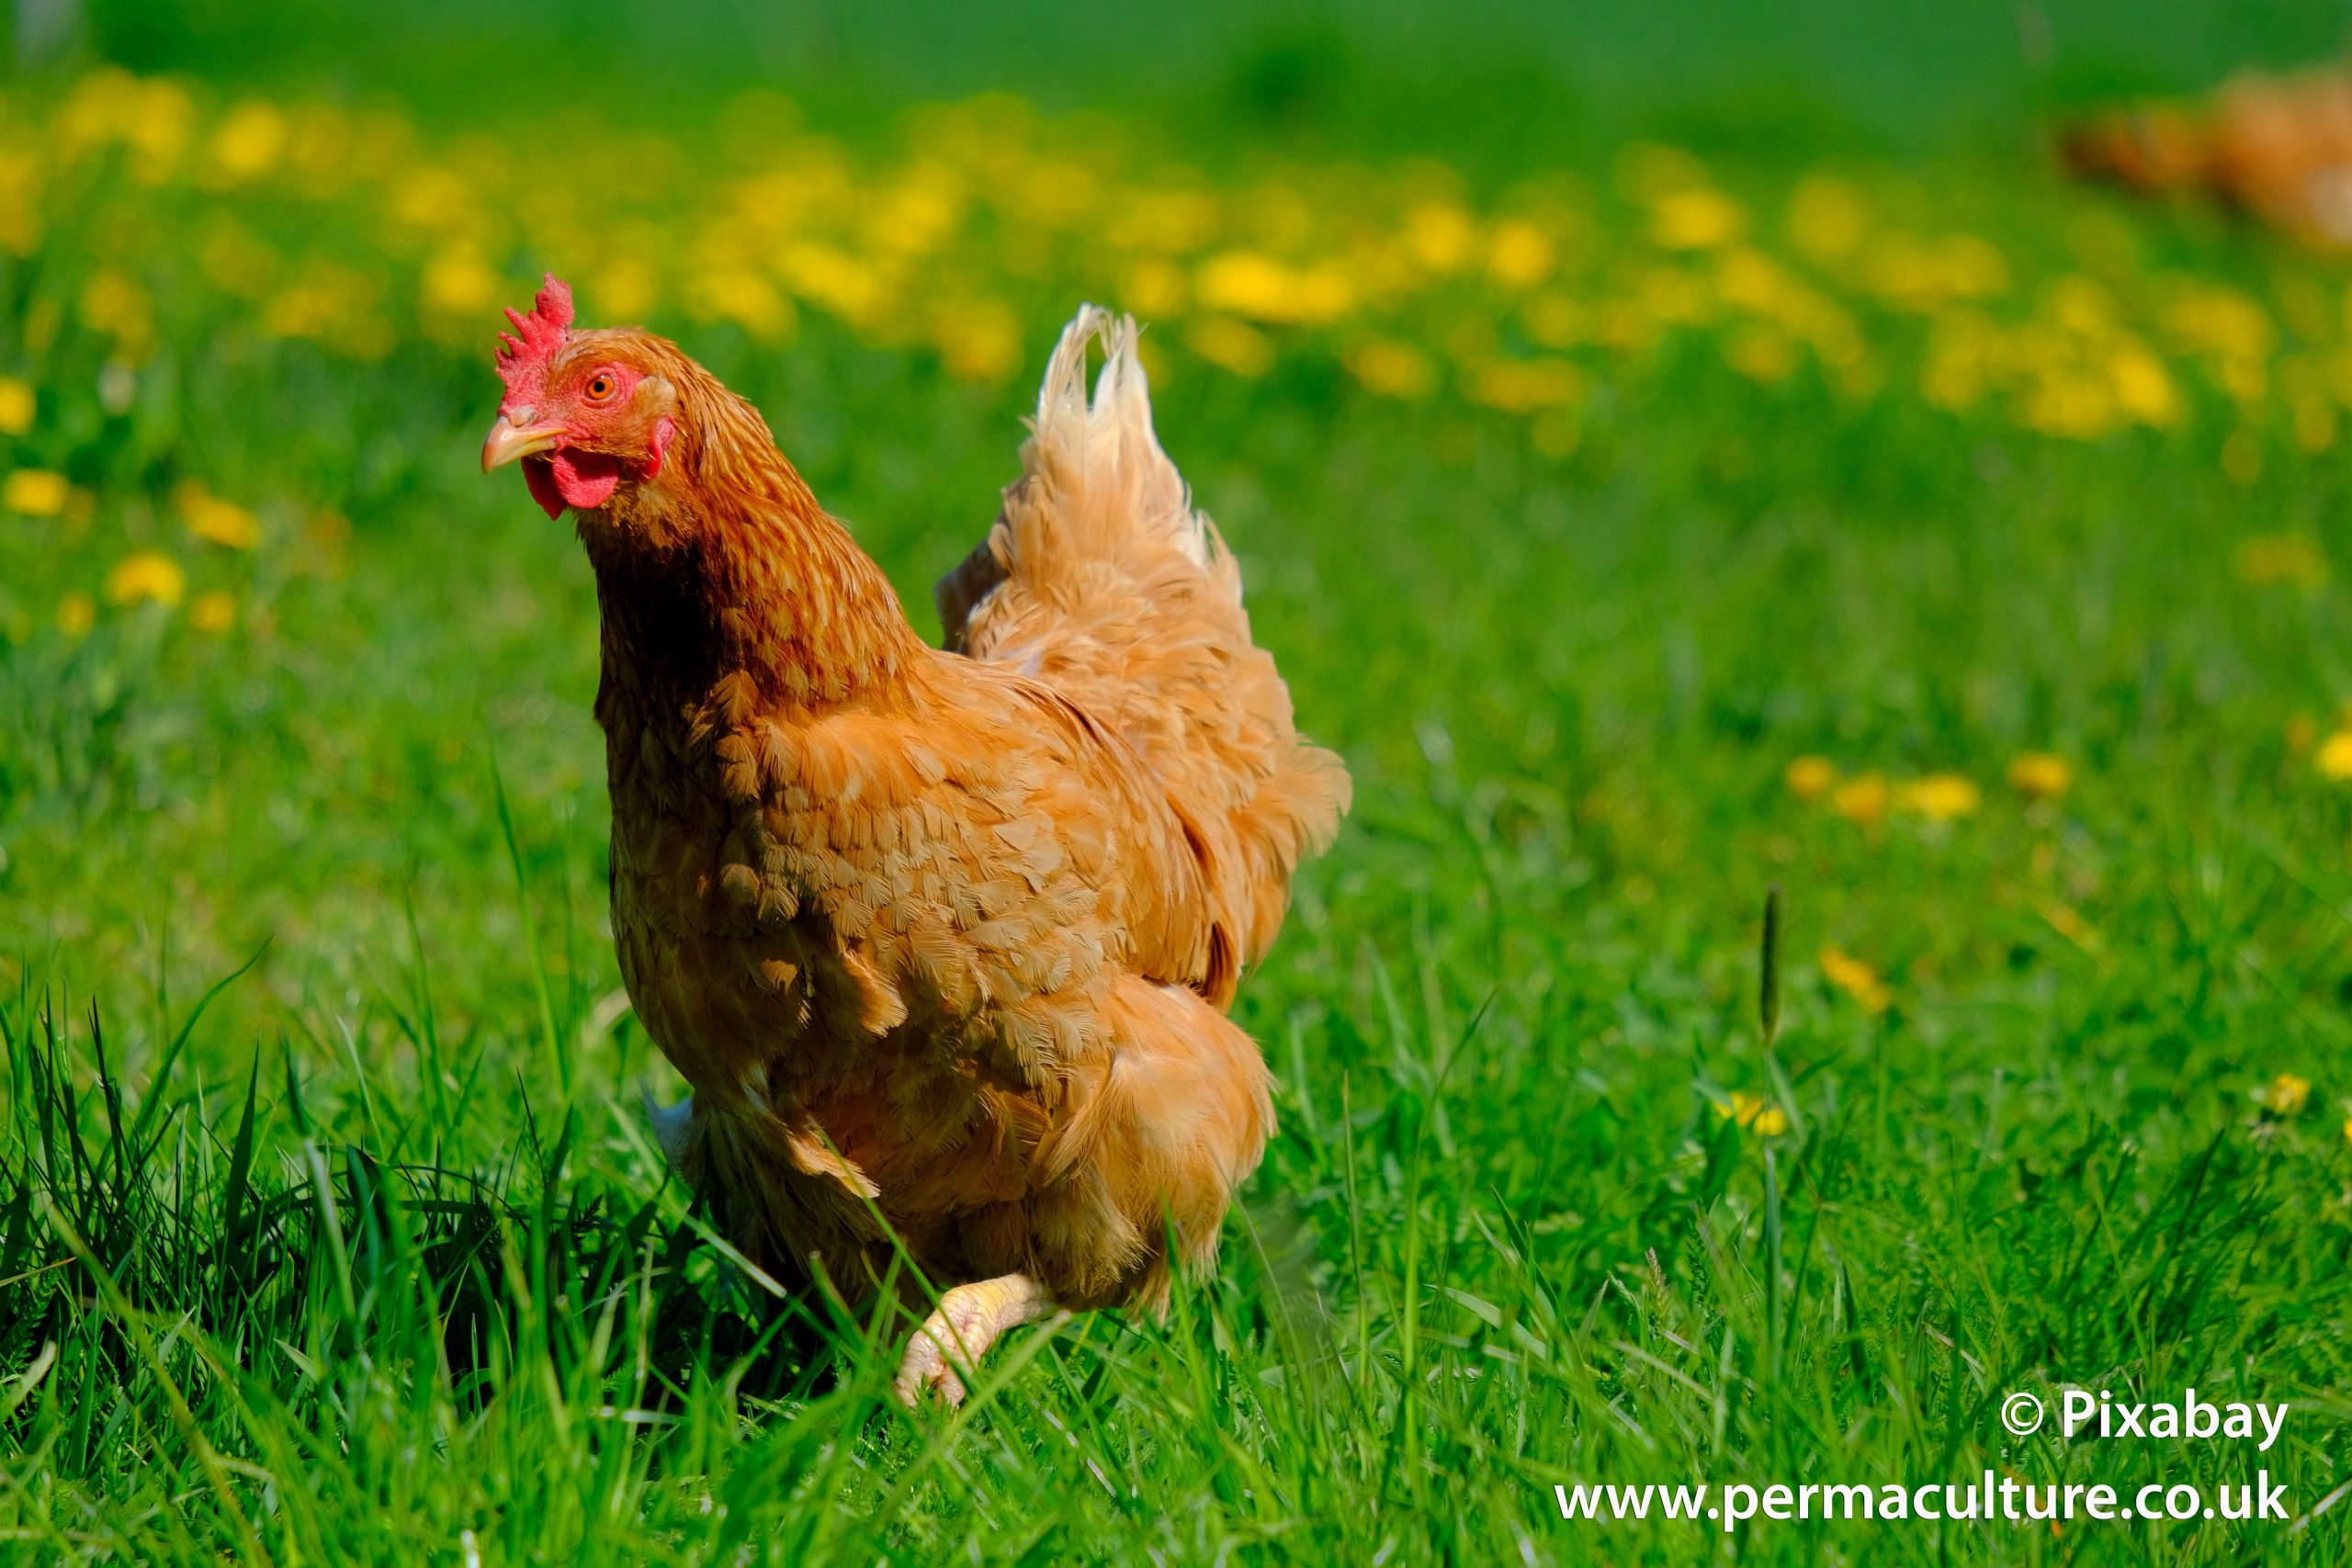 V. Factors to Consider for Successful Implementation of Hens in Land Restoration Projects